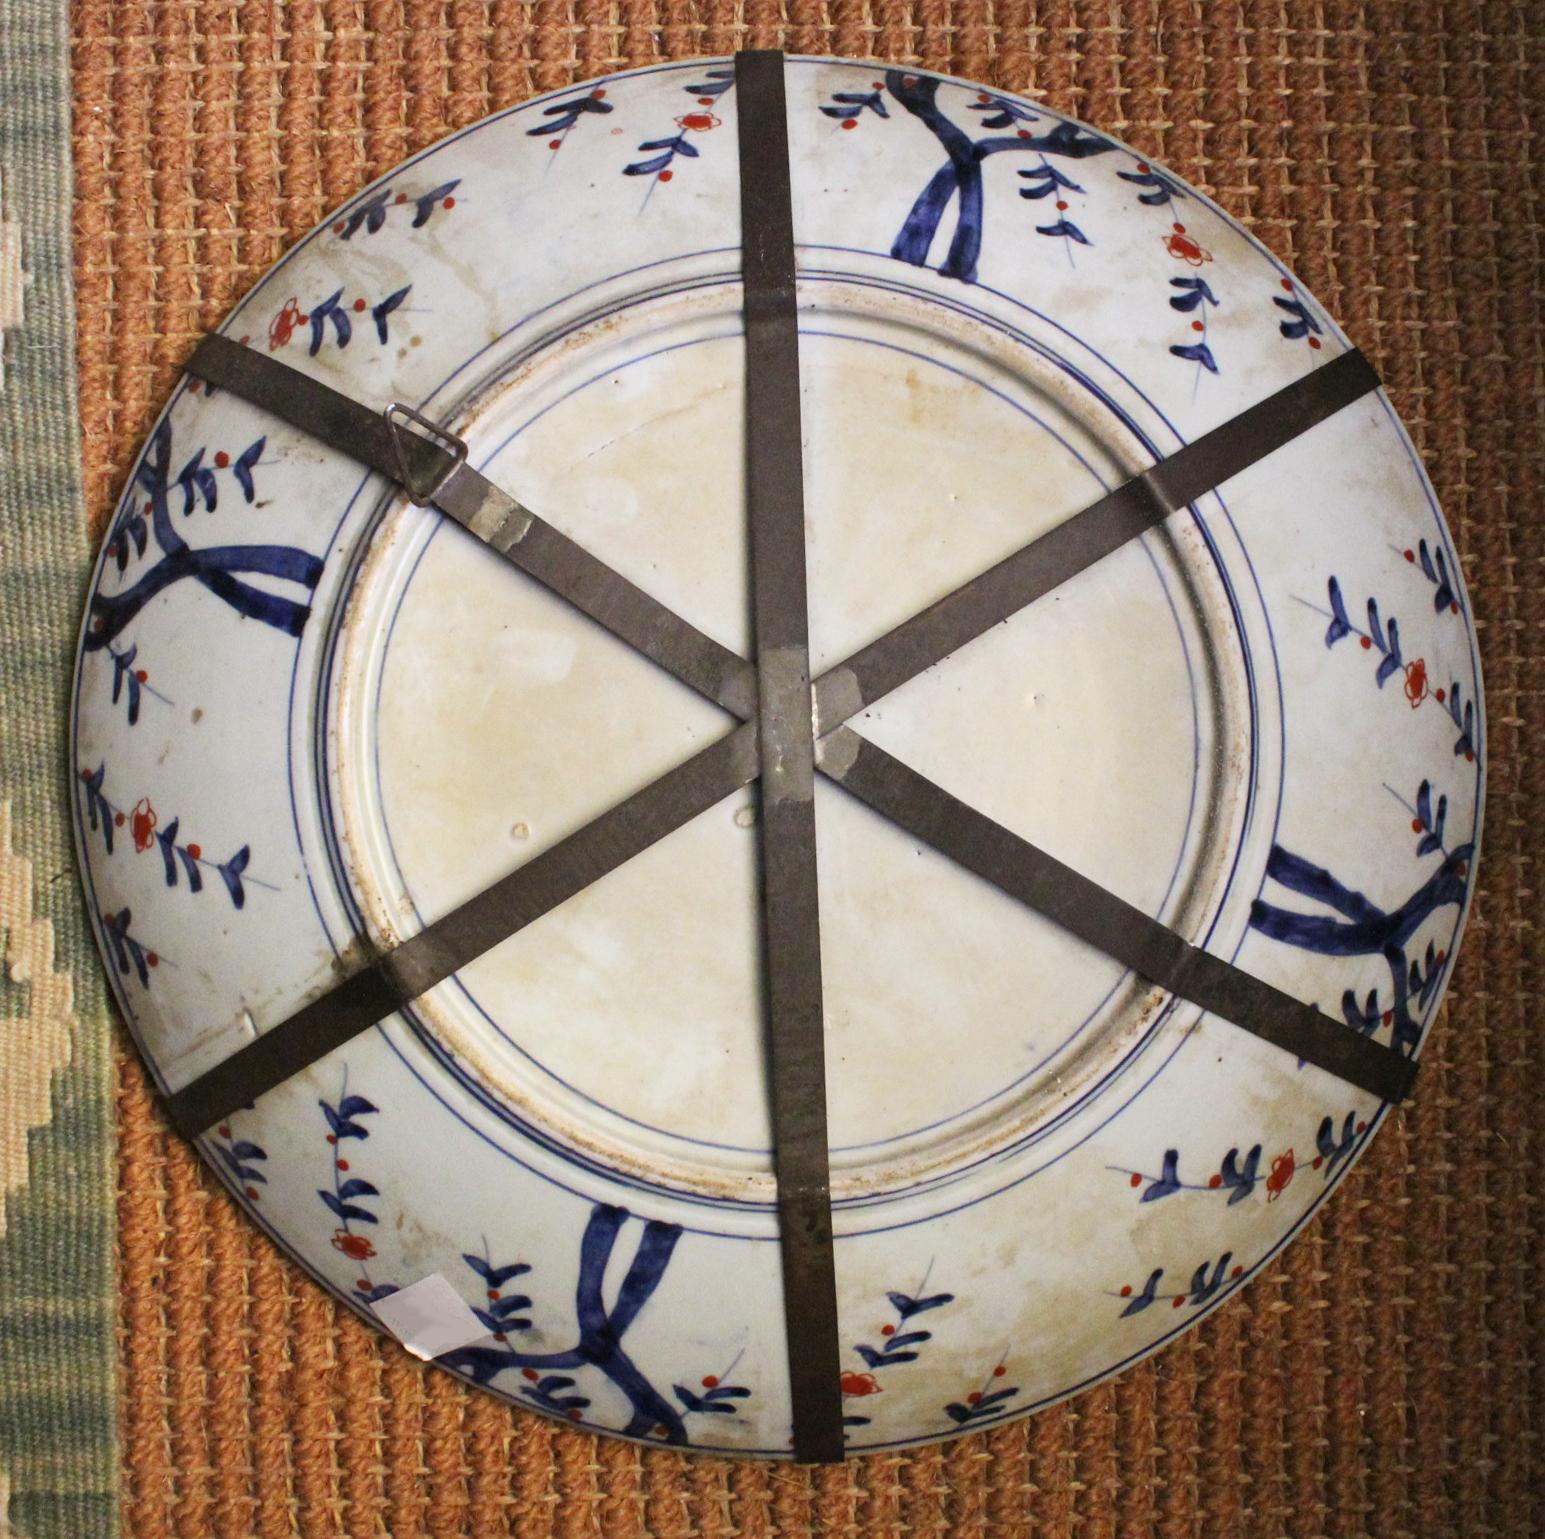 19th Century Japanese Imari Ware Porcelain Plate Hand Painted with Flower Motifs 1